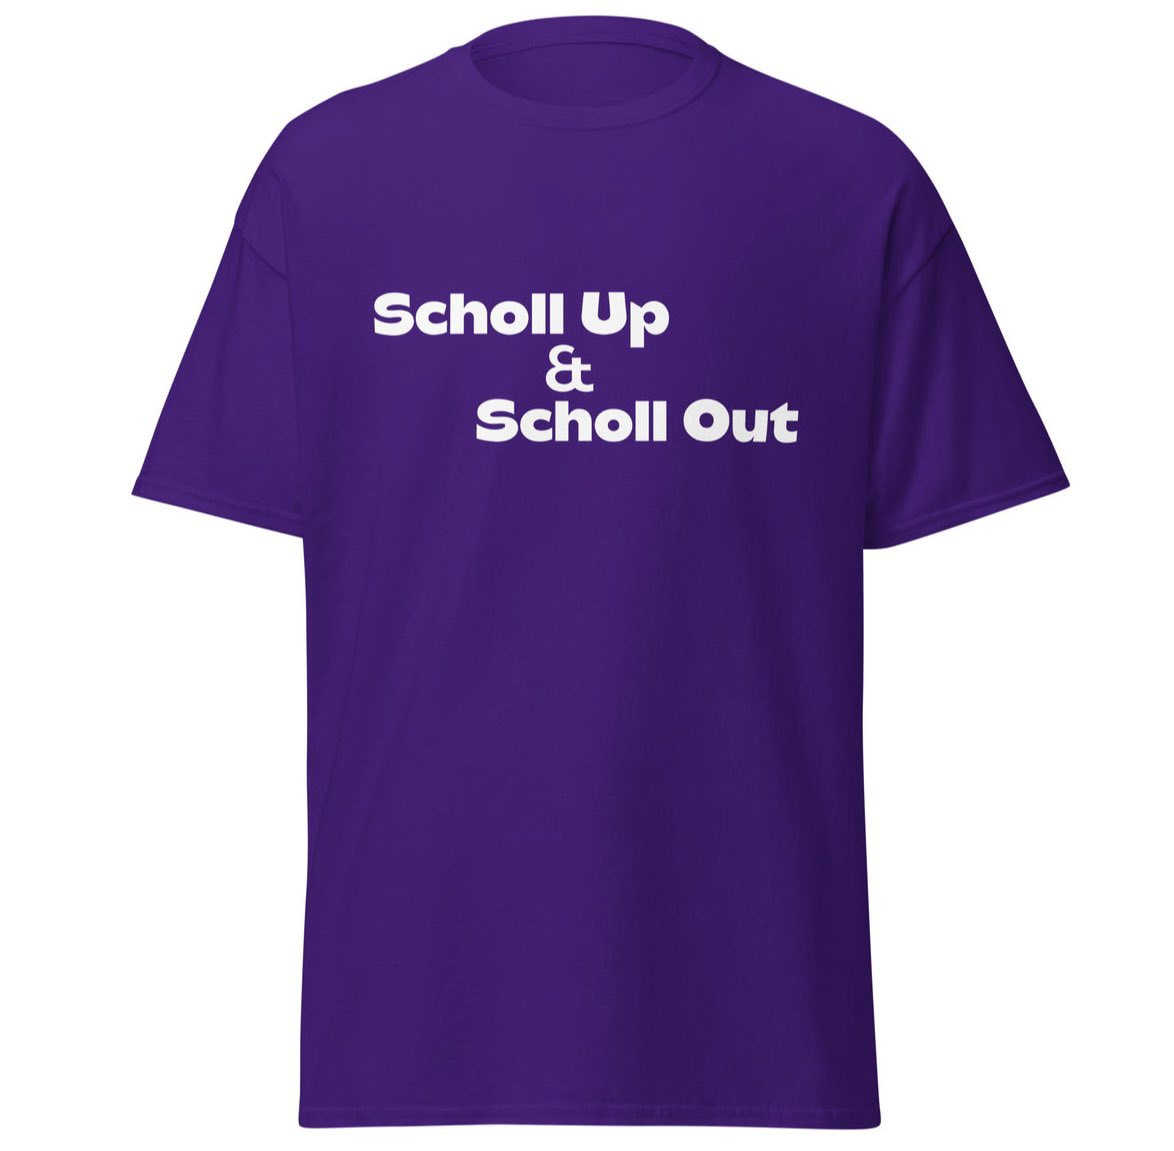 Watching #tcubasketball games at #Schollmaier is awesome. Buy this T and a portion of all proceeds will be used to pay #TCU athletes for sponsorships deals with #nilvillage #tcumbb #tcuwbb #gofrogs nilvillage.myshopify.com/products/schol…